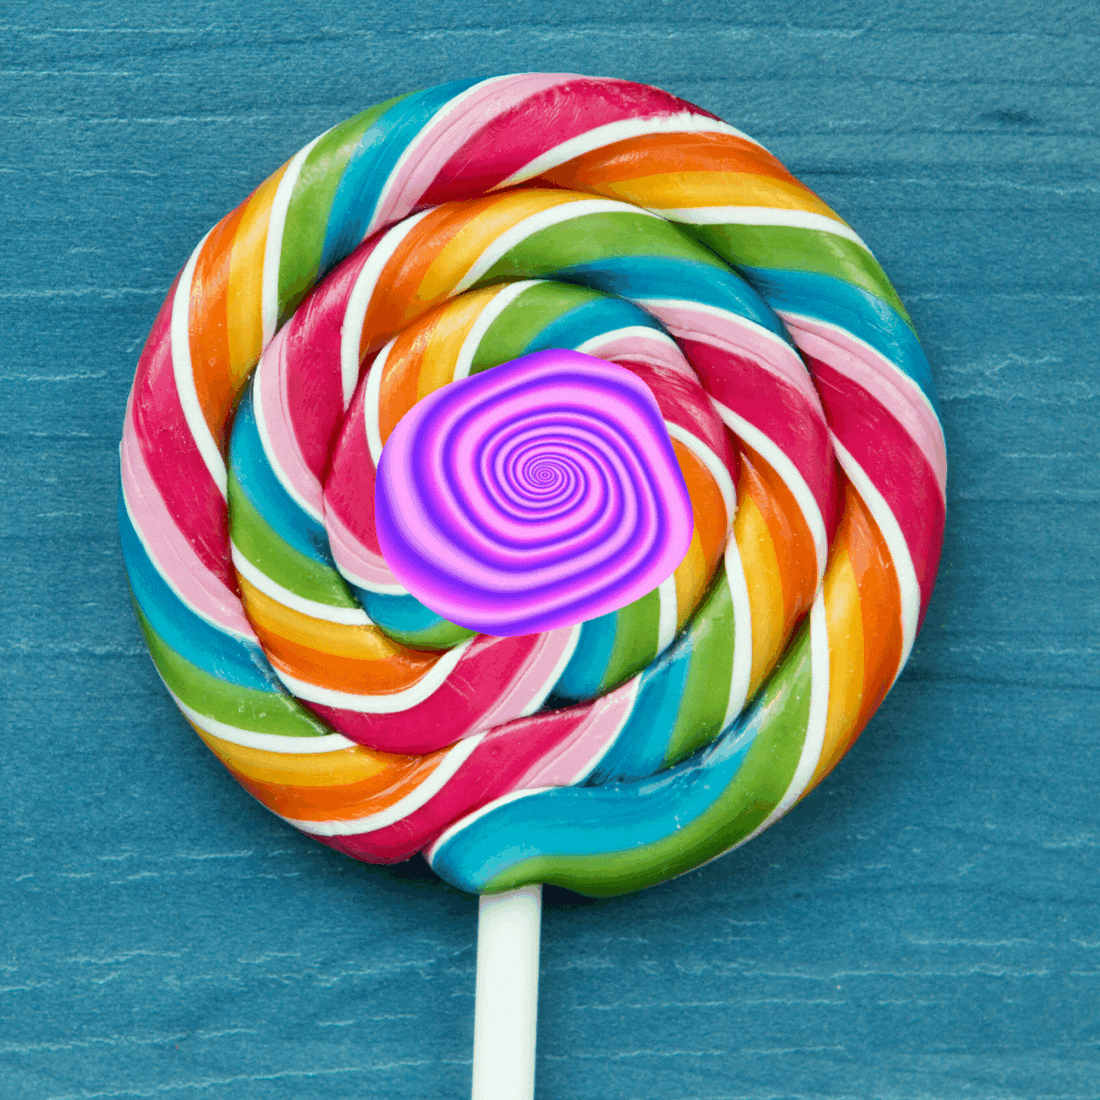 Do Lollipops Expire? Yes and No... We Have The Full In Depth Answer